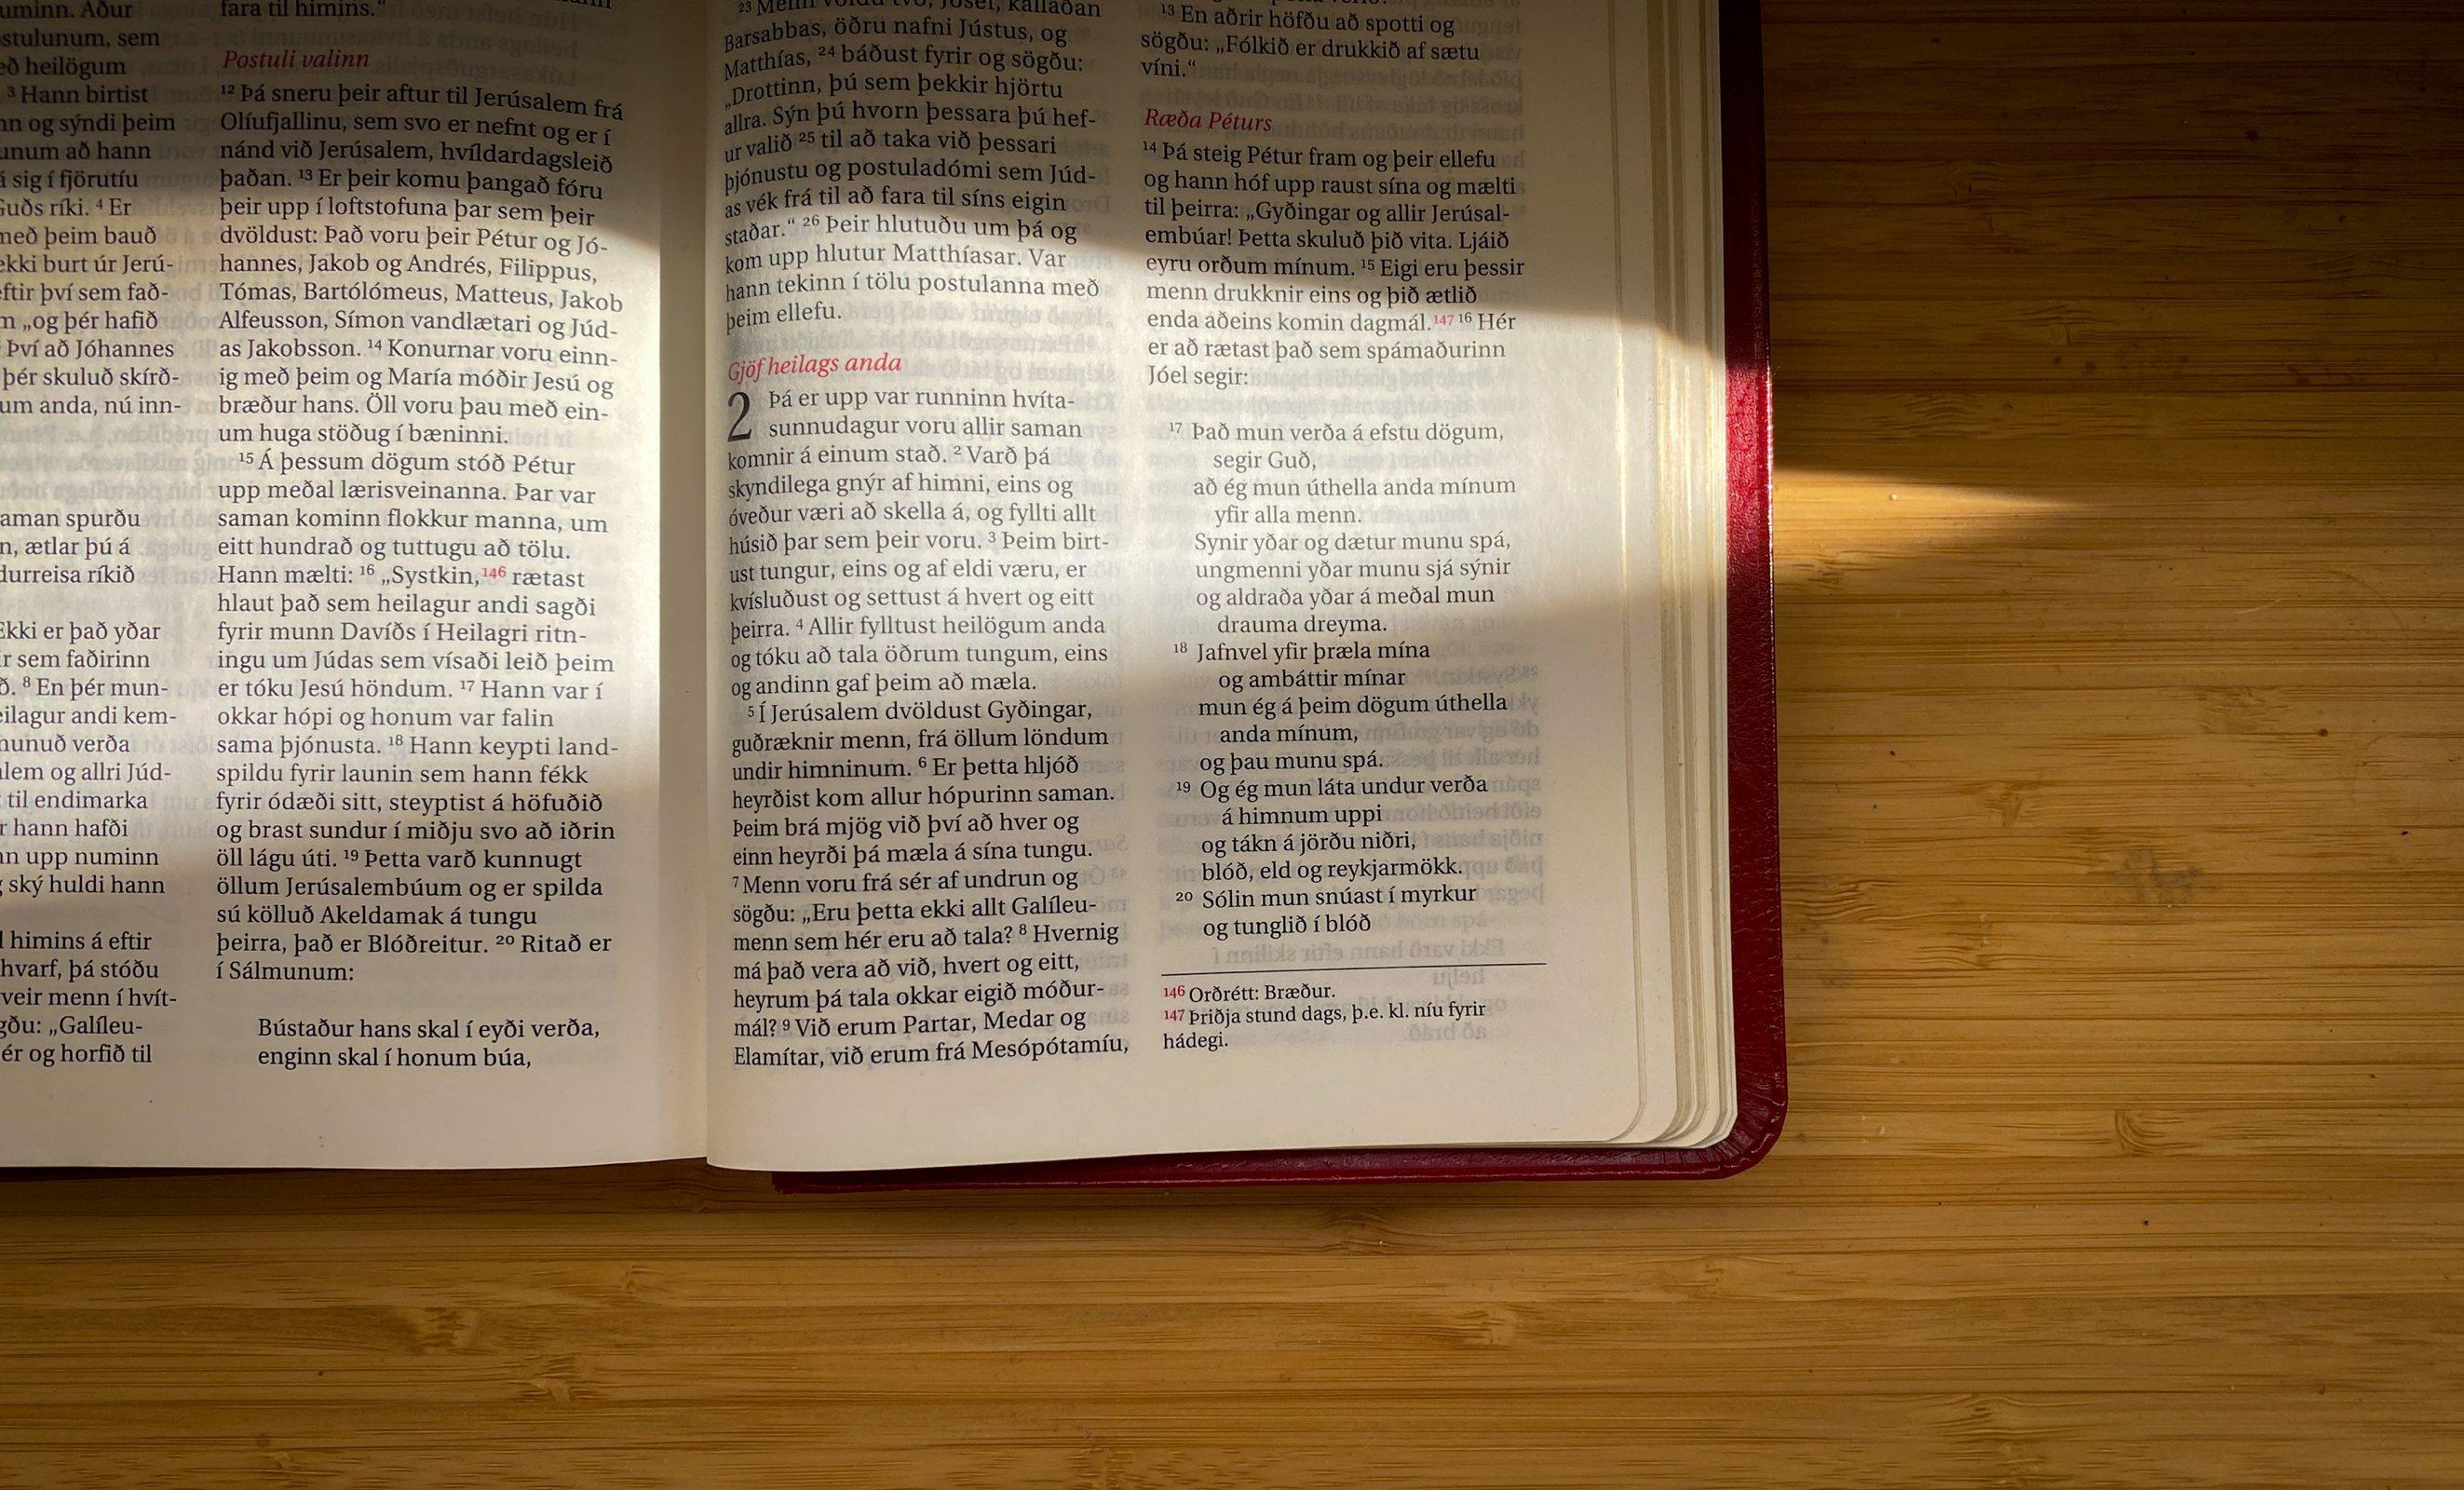 The passage from Acts in the Icelandic Bible from 2007. Photo: LWF/A. Danielsson